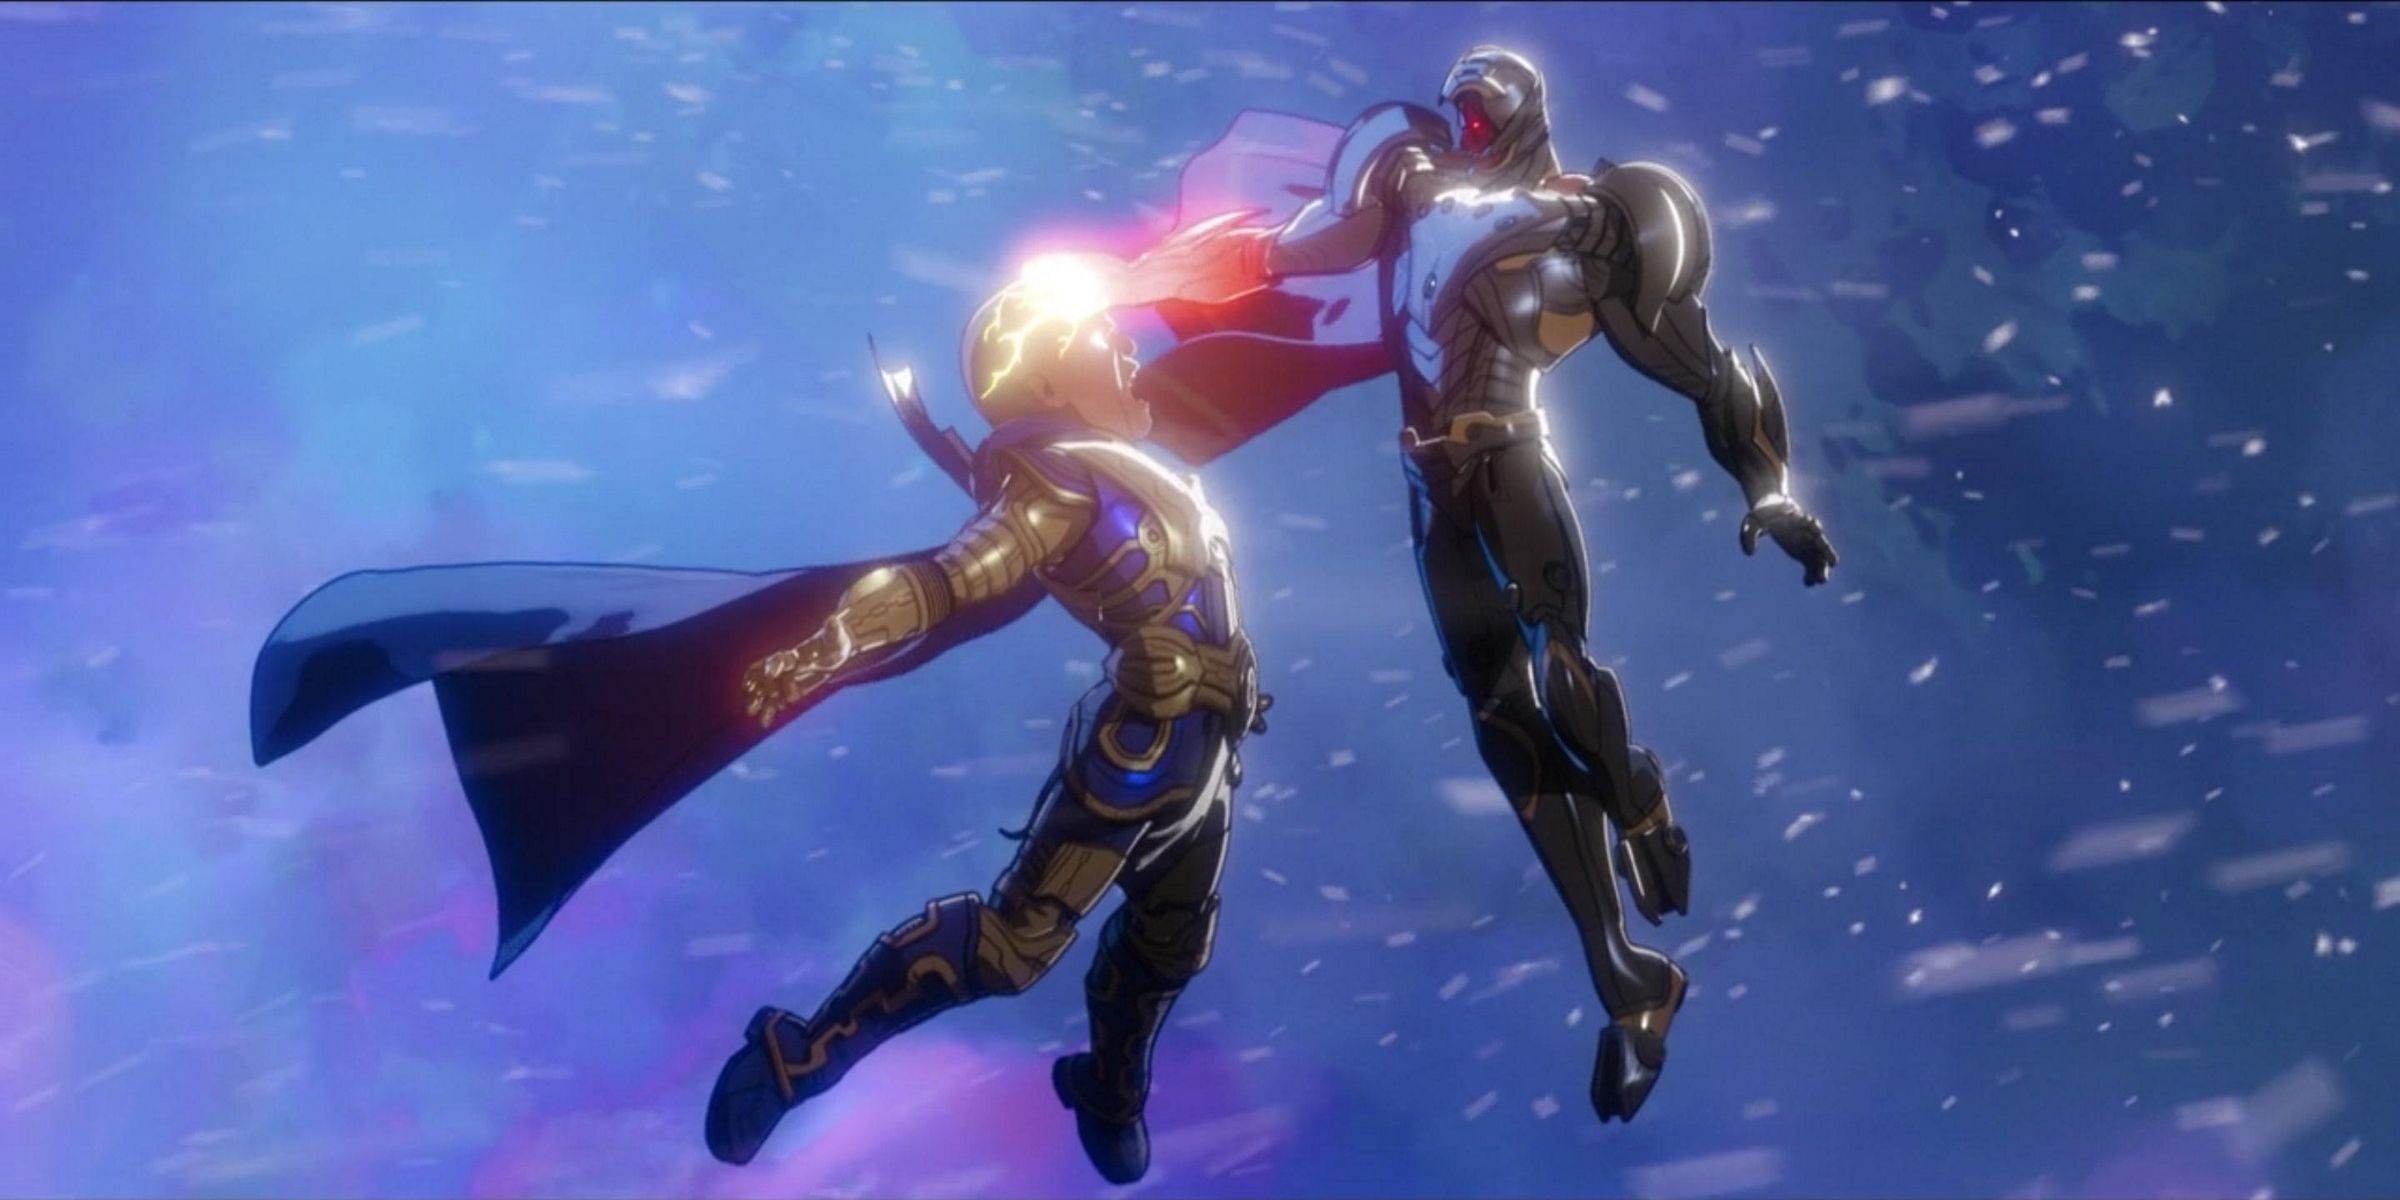 Infinity Ultron defeating the Watcher in What If...?